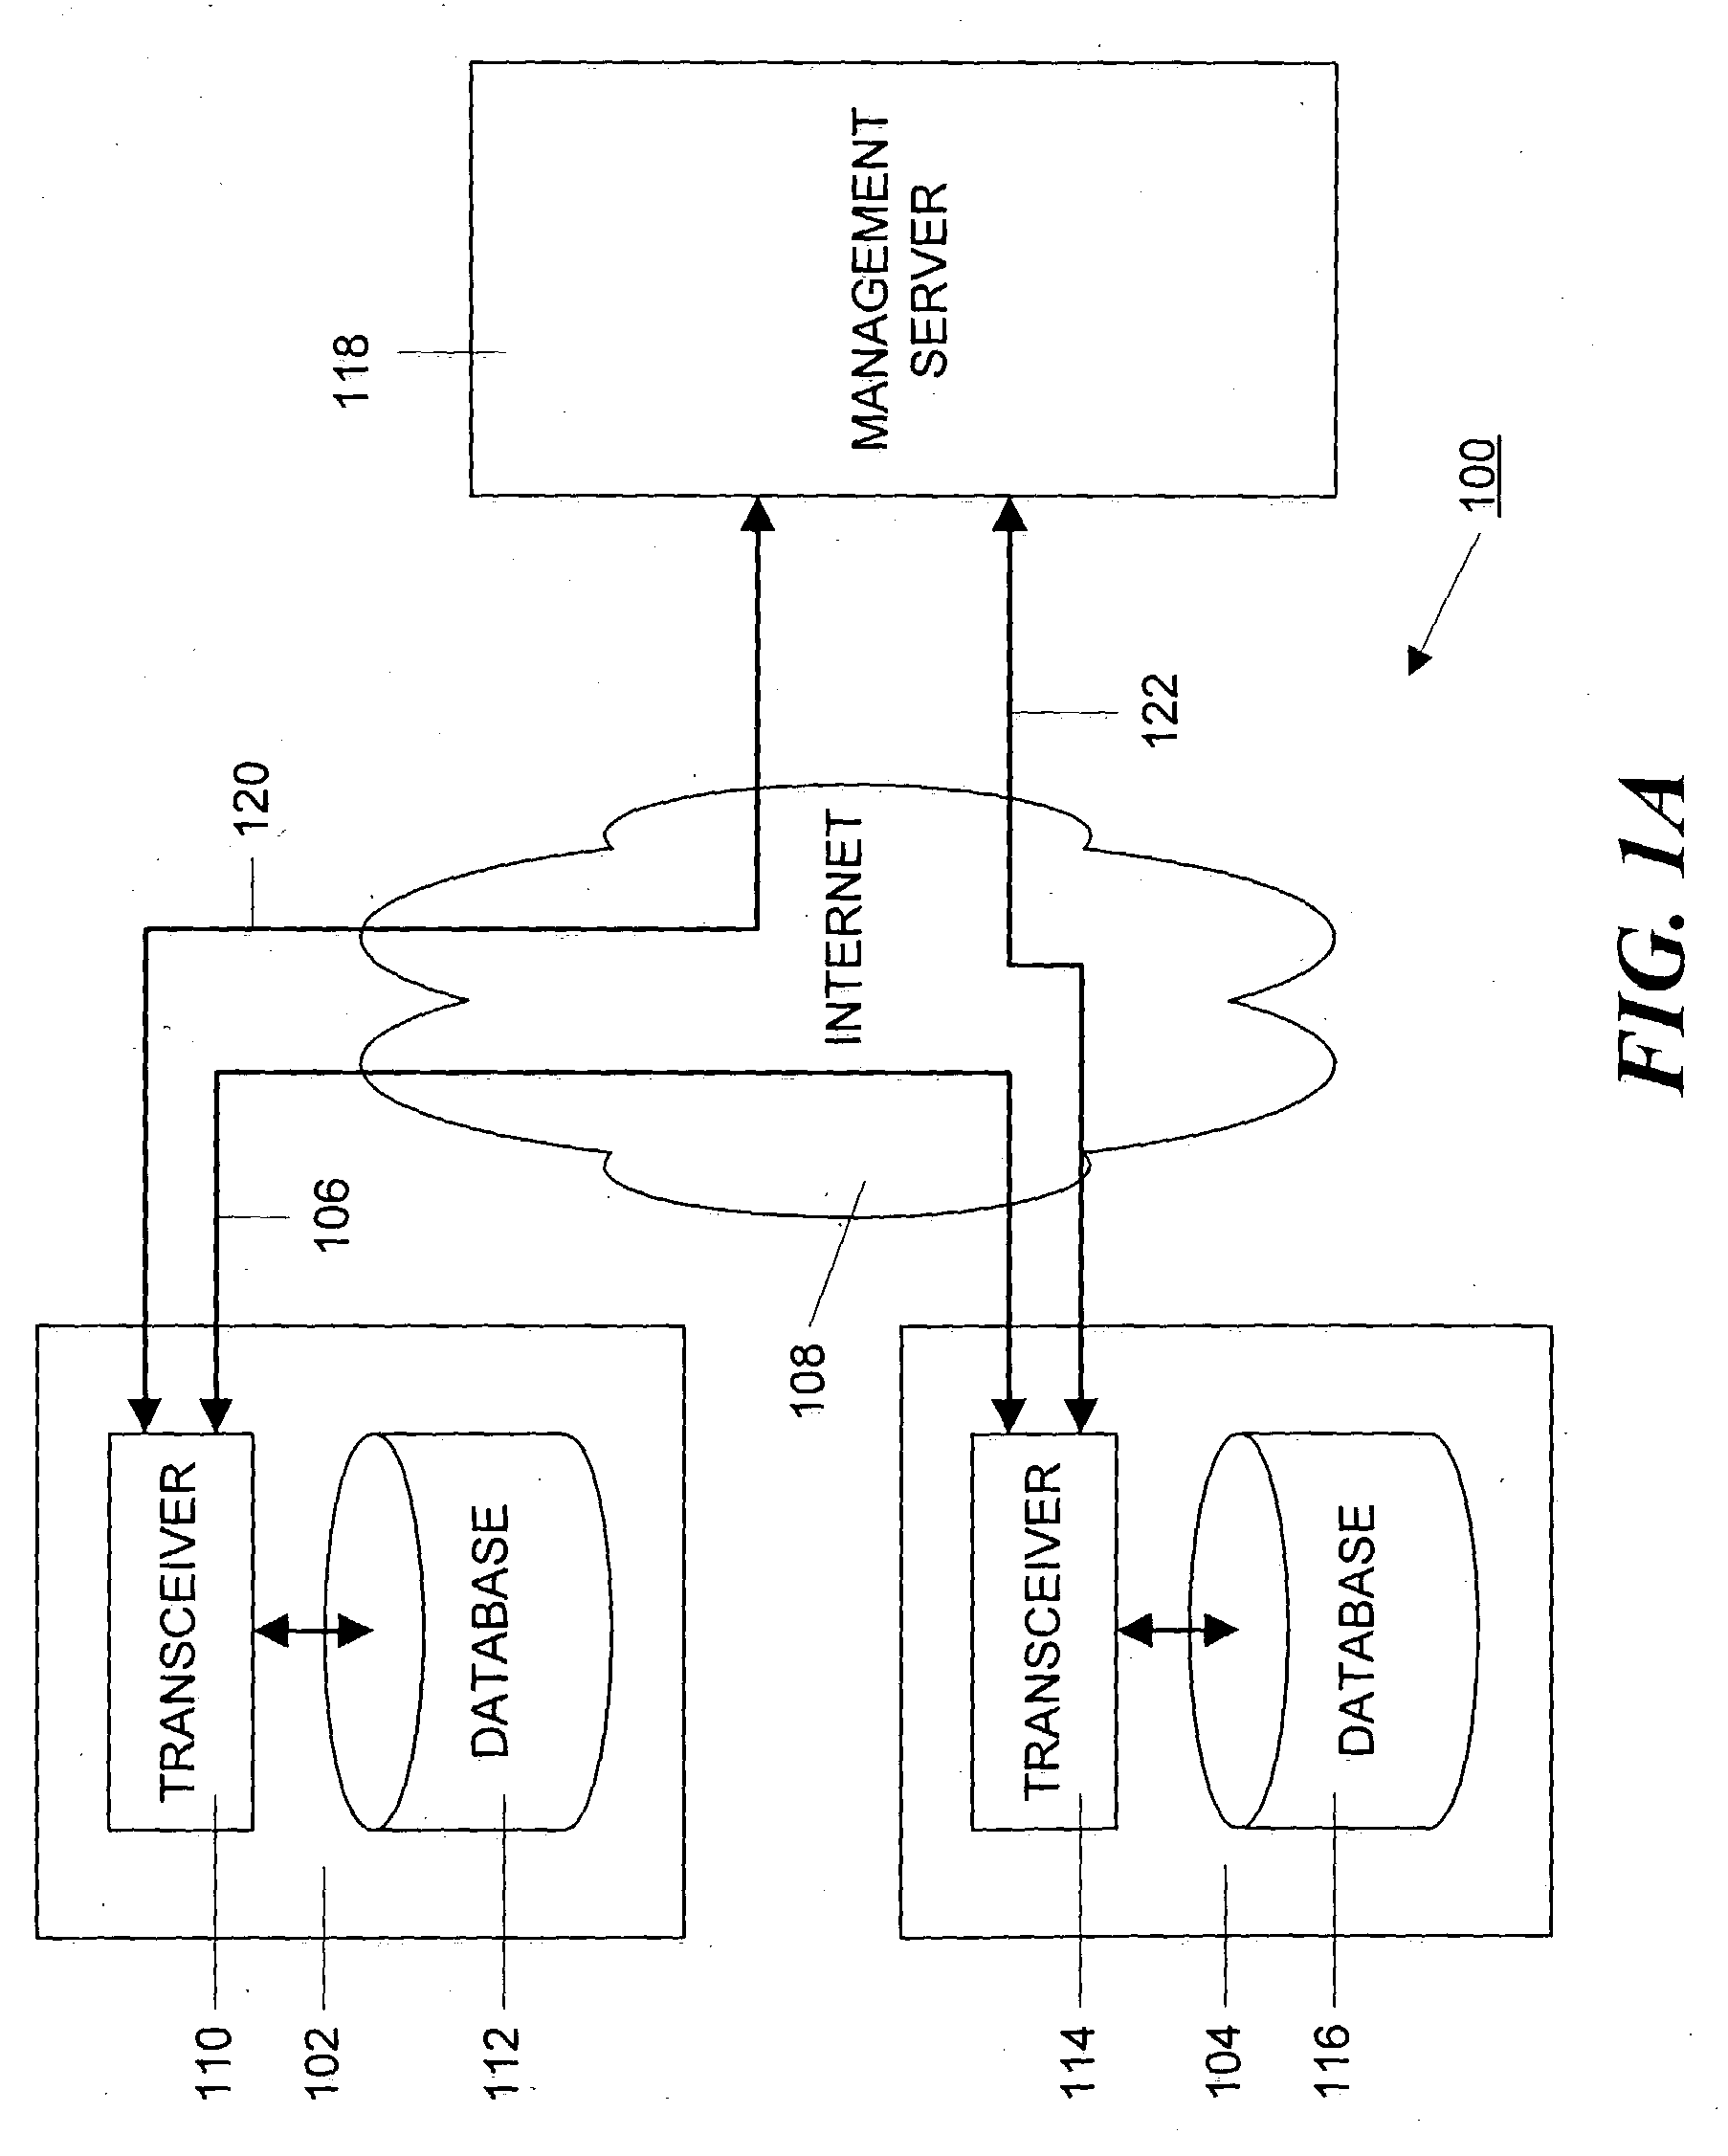 Method and apparatus for managing and displaying contact authentication in a peer-to-peer collaboration system